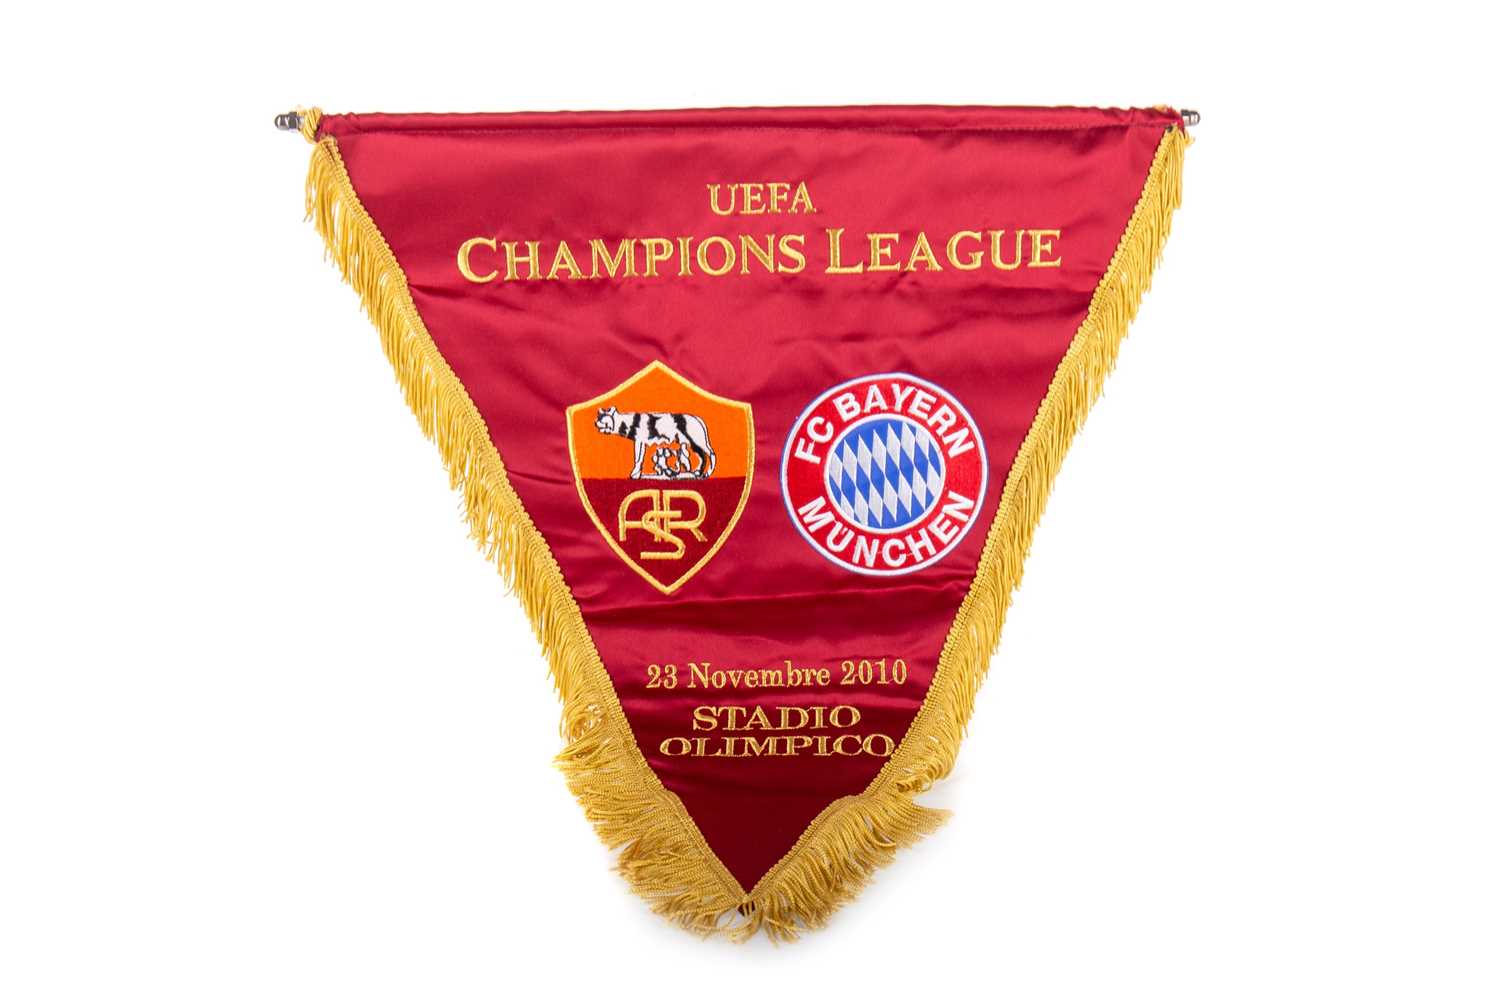 Lot 1746 - A.S. ROMA VS. F.C. BAYERN MUNICH, OFFICIAL CHAMPIONS LEAGUE PENNANT